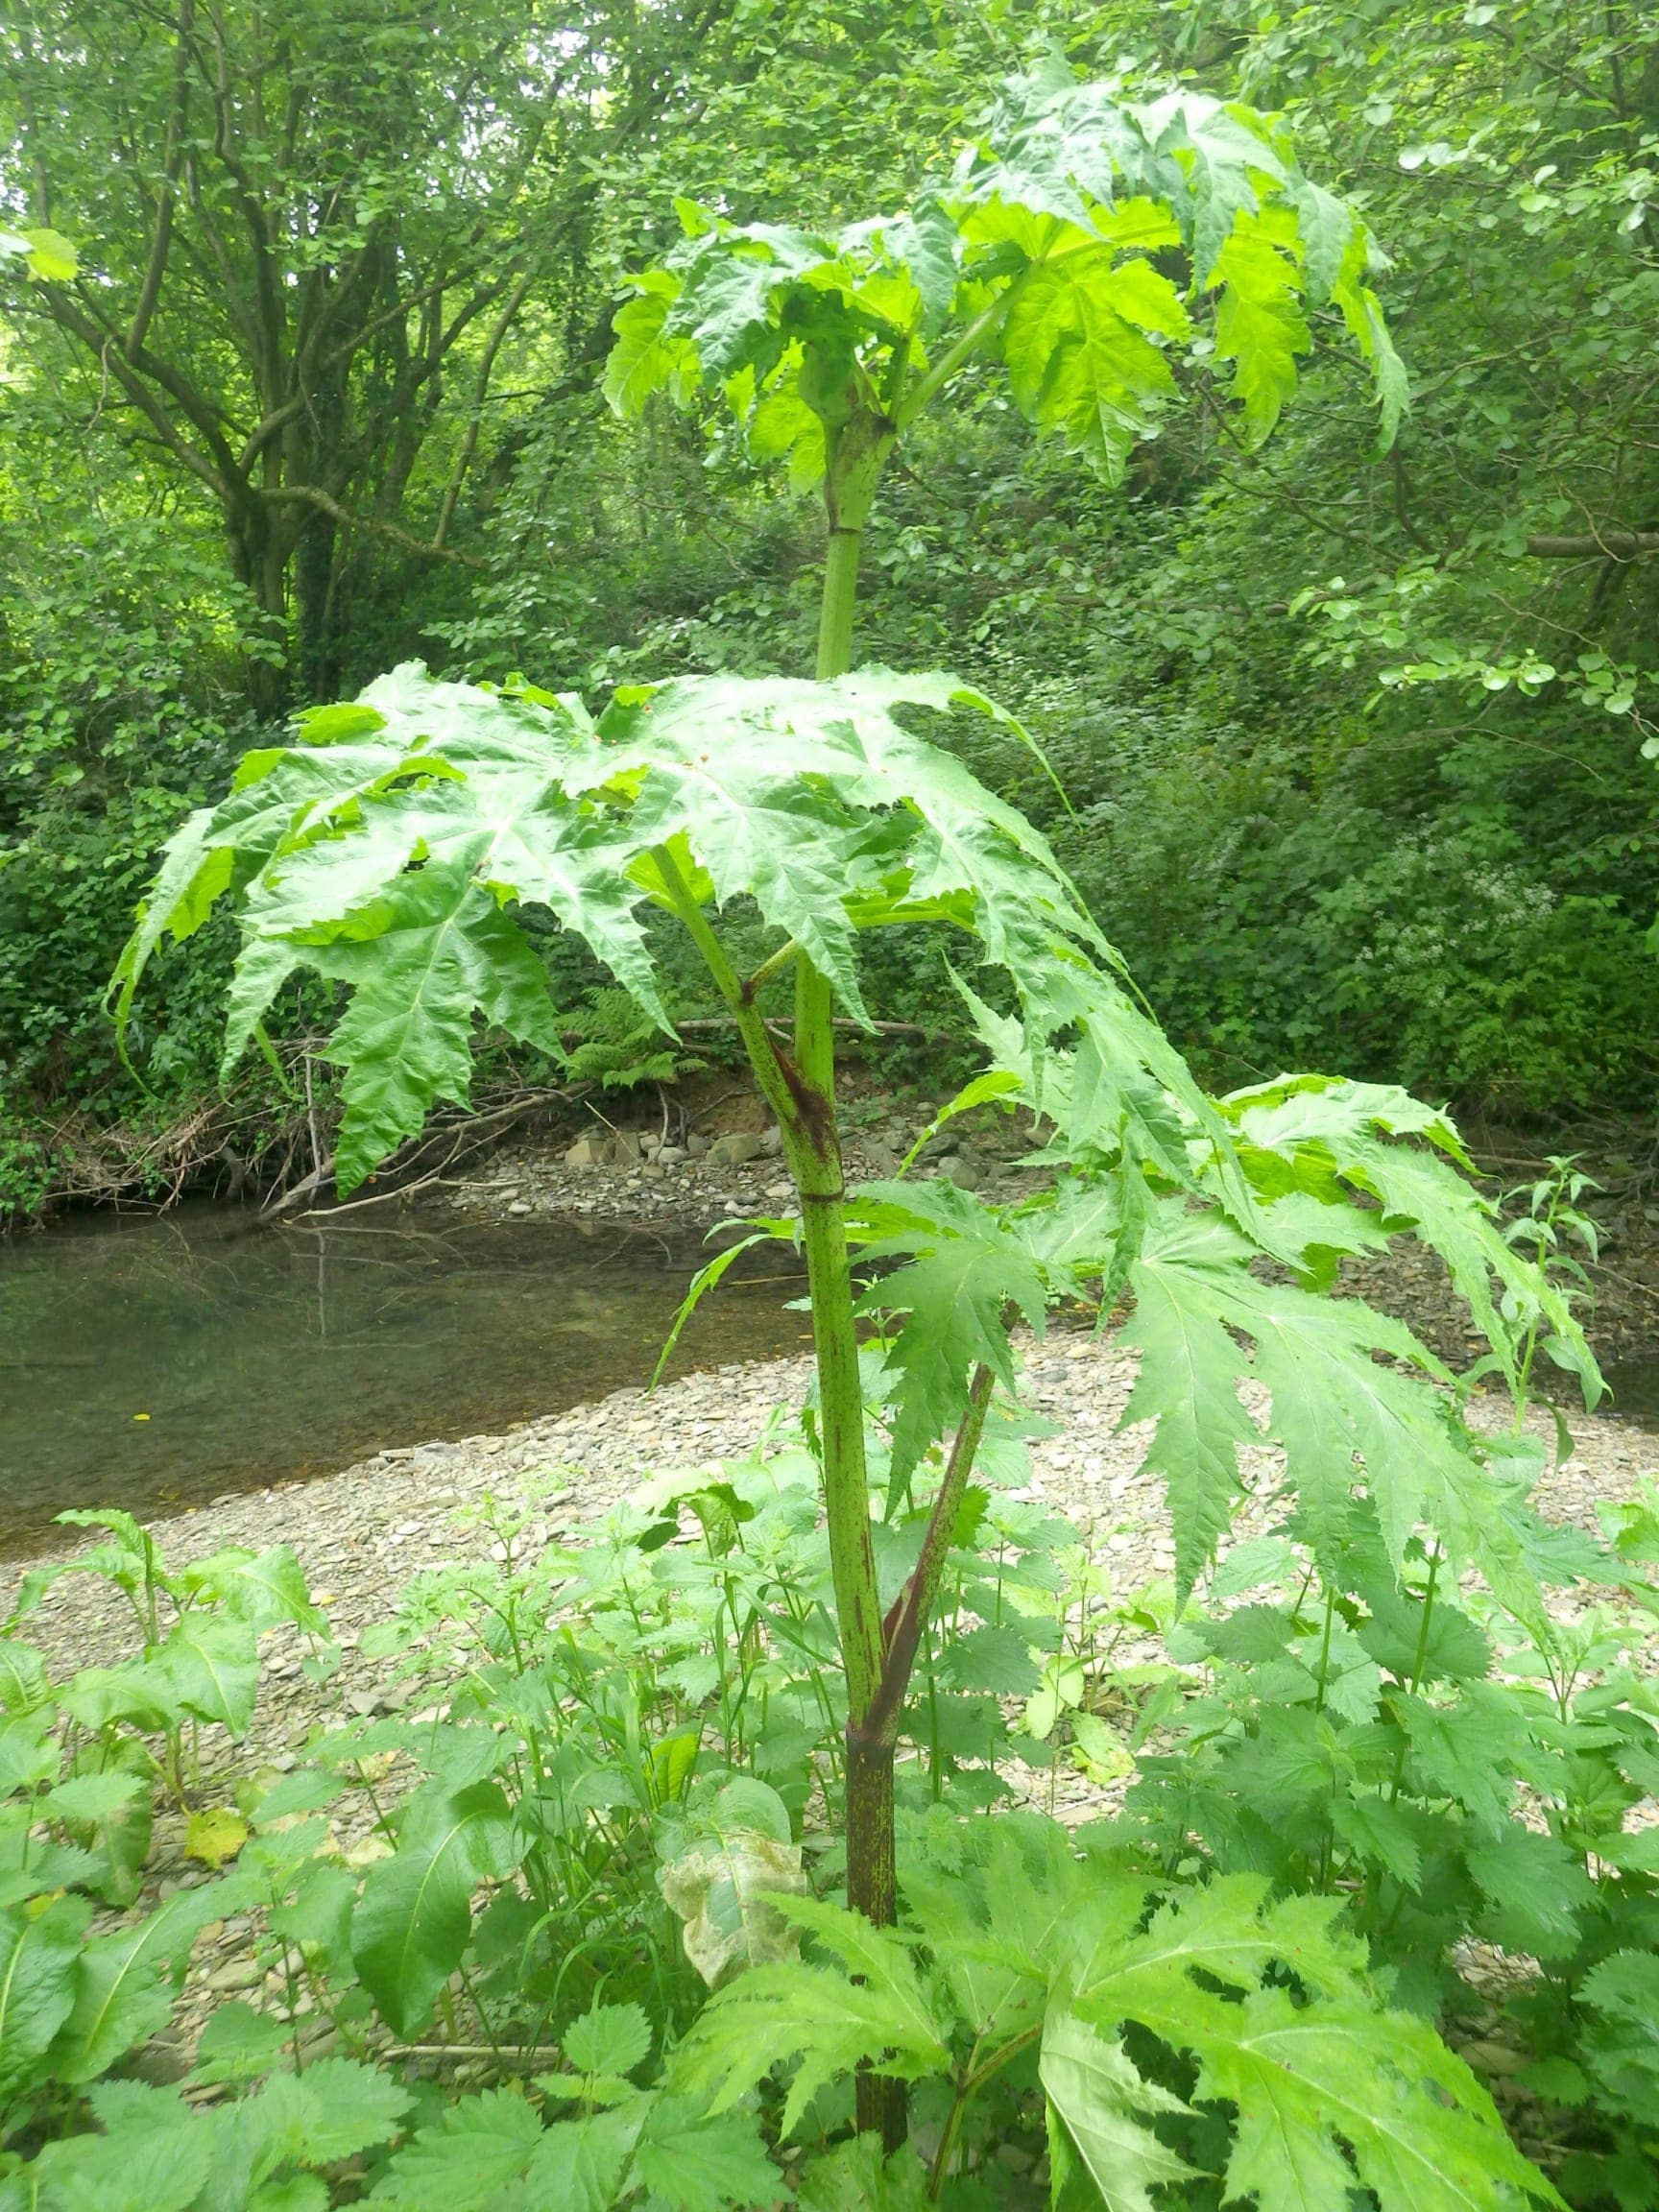 A Giant hogweed plant found in a new location on the river Arrow in June 2019. The Foundation were alerted and the plant dealt with before its seeds were spread downstream